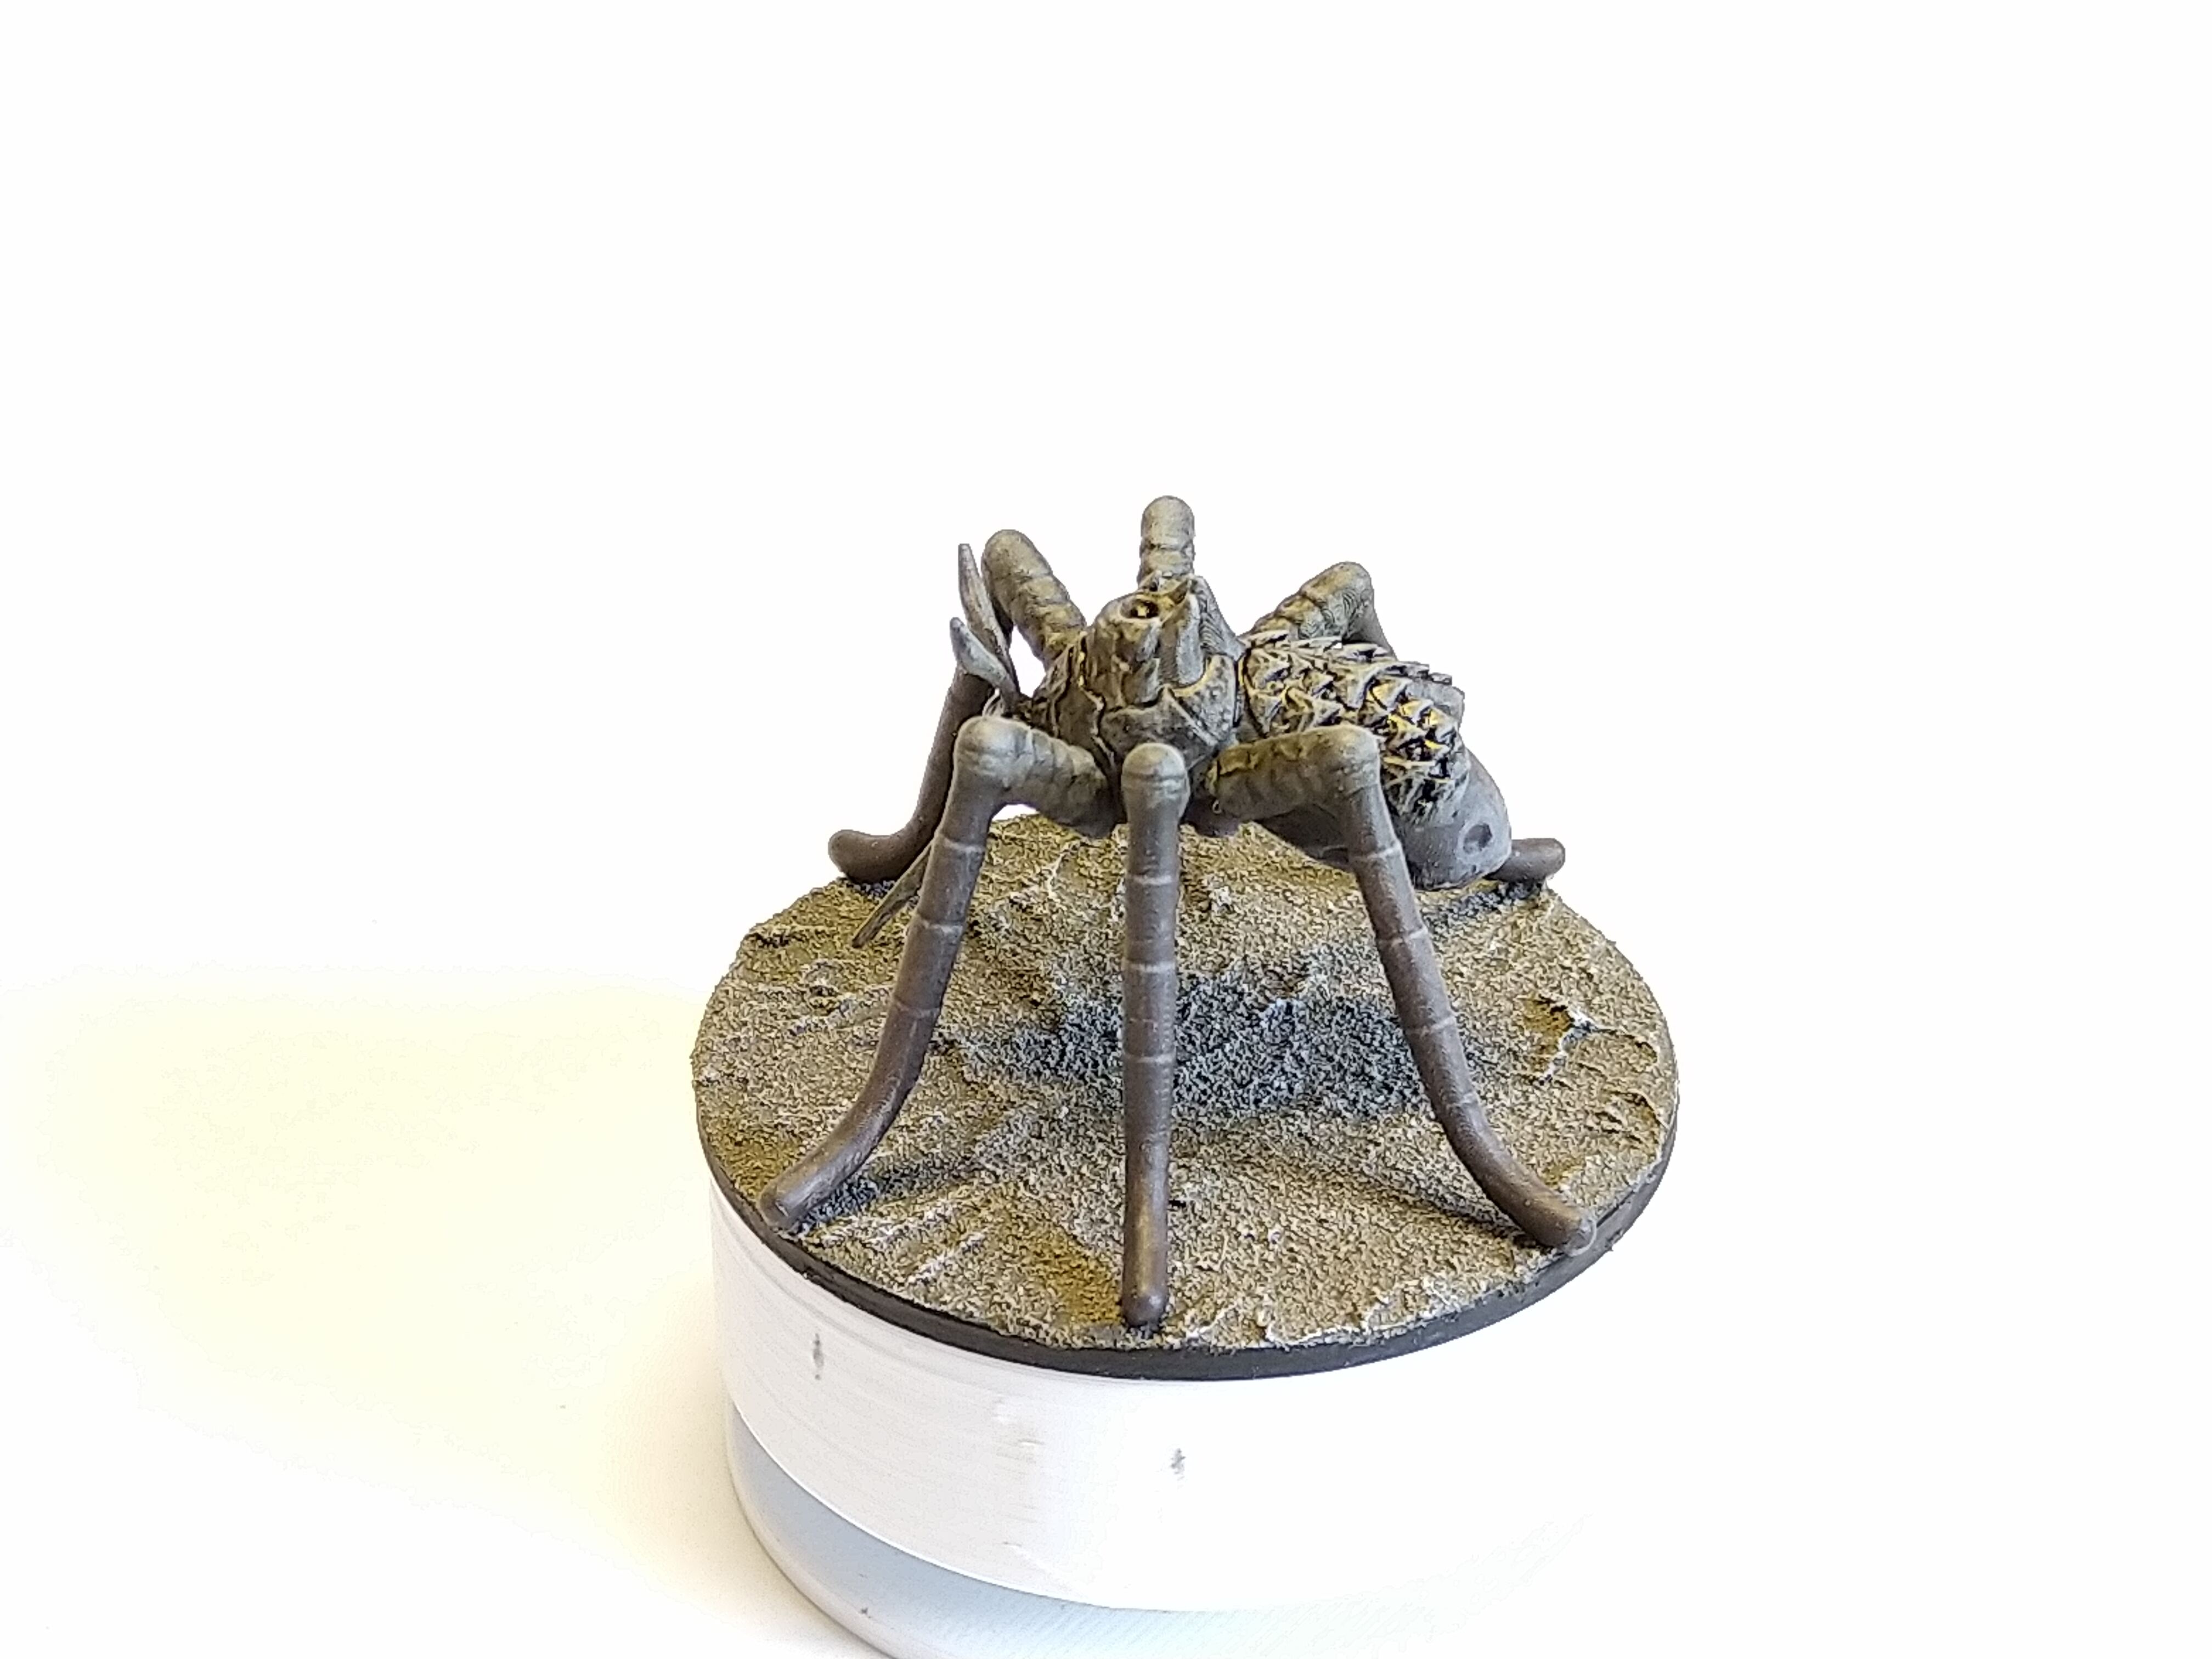 GIANT MOSQUITO CREATURE - 28MM DND MINIATURE